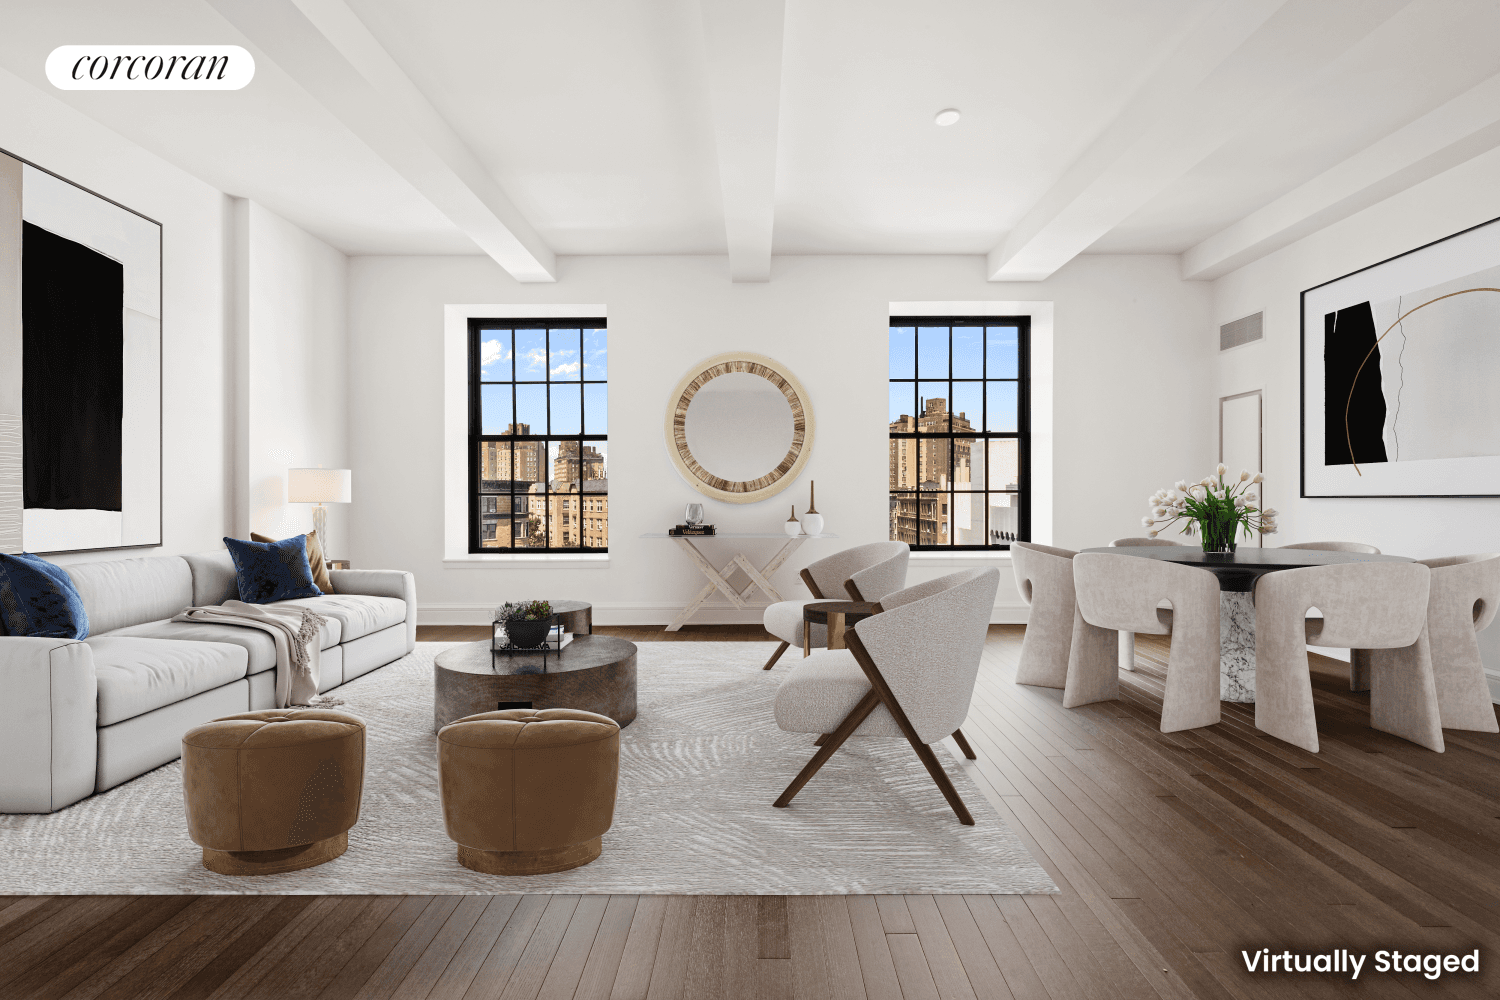 Available immediately. Floating high above Greenwich Village in downtown's premier condominium, Greenwich Lane, this inviting and meticulous corner 3 bedroom and 3.